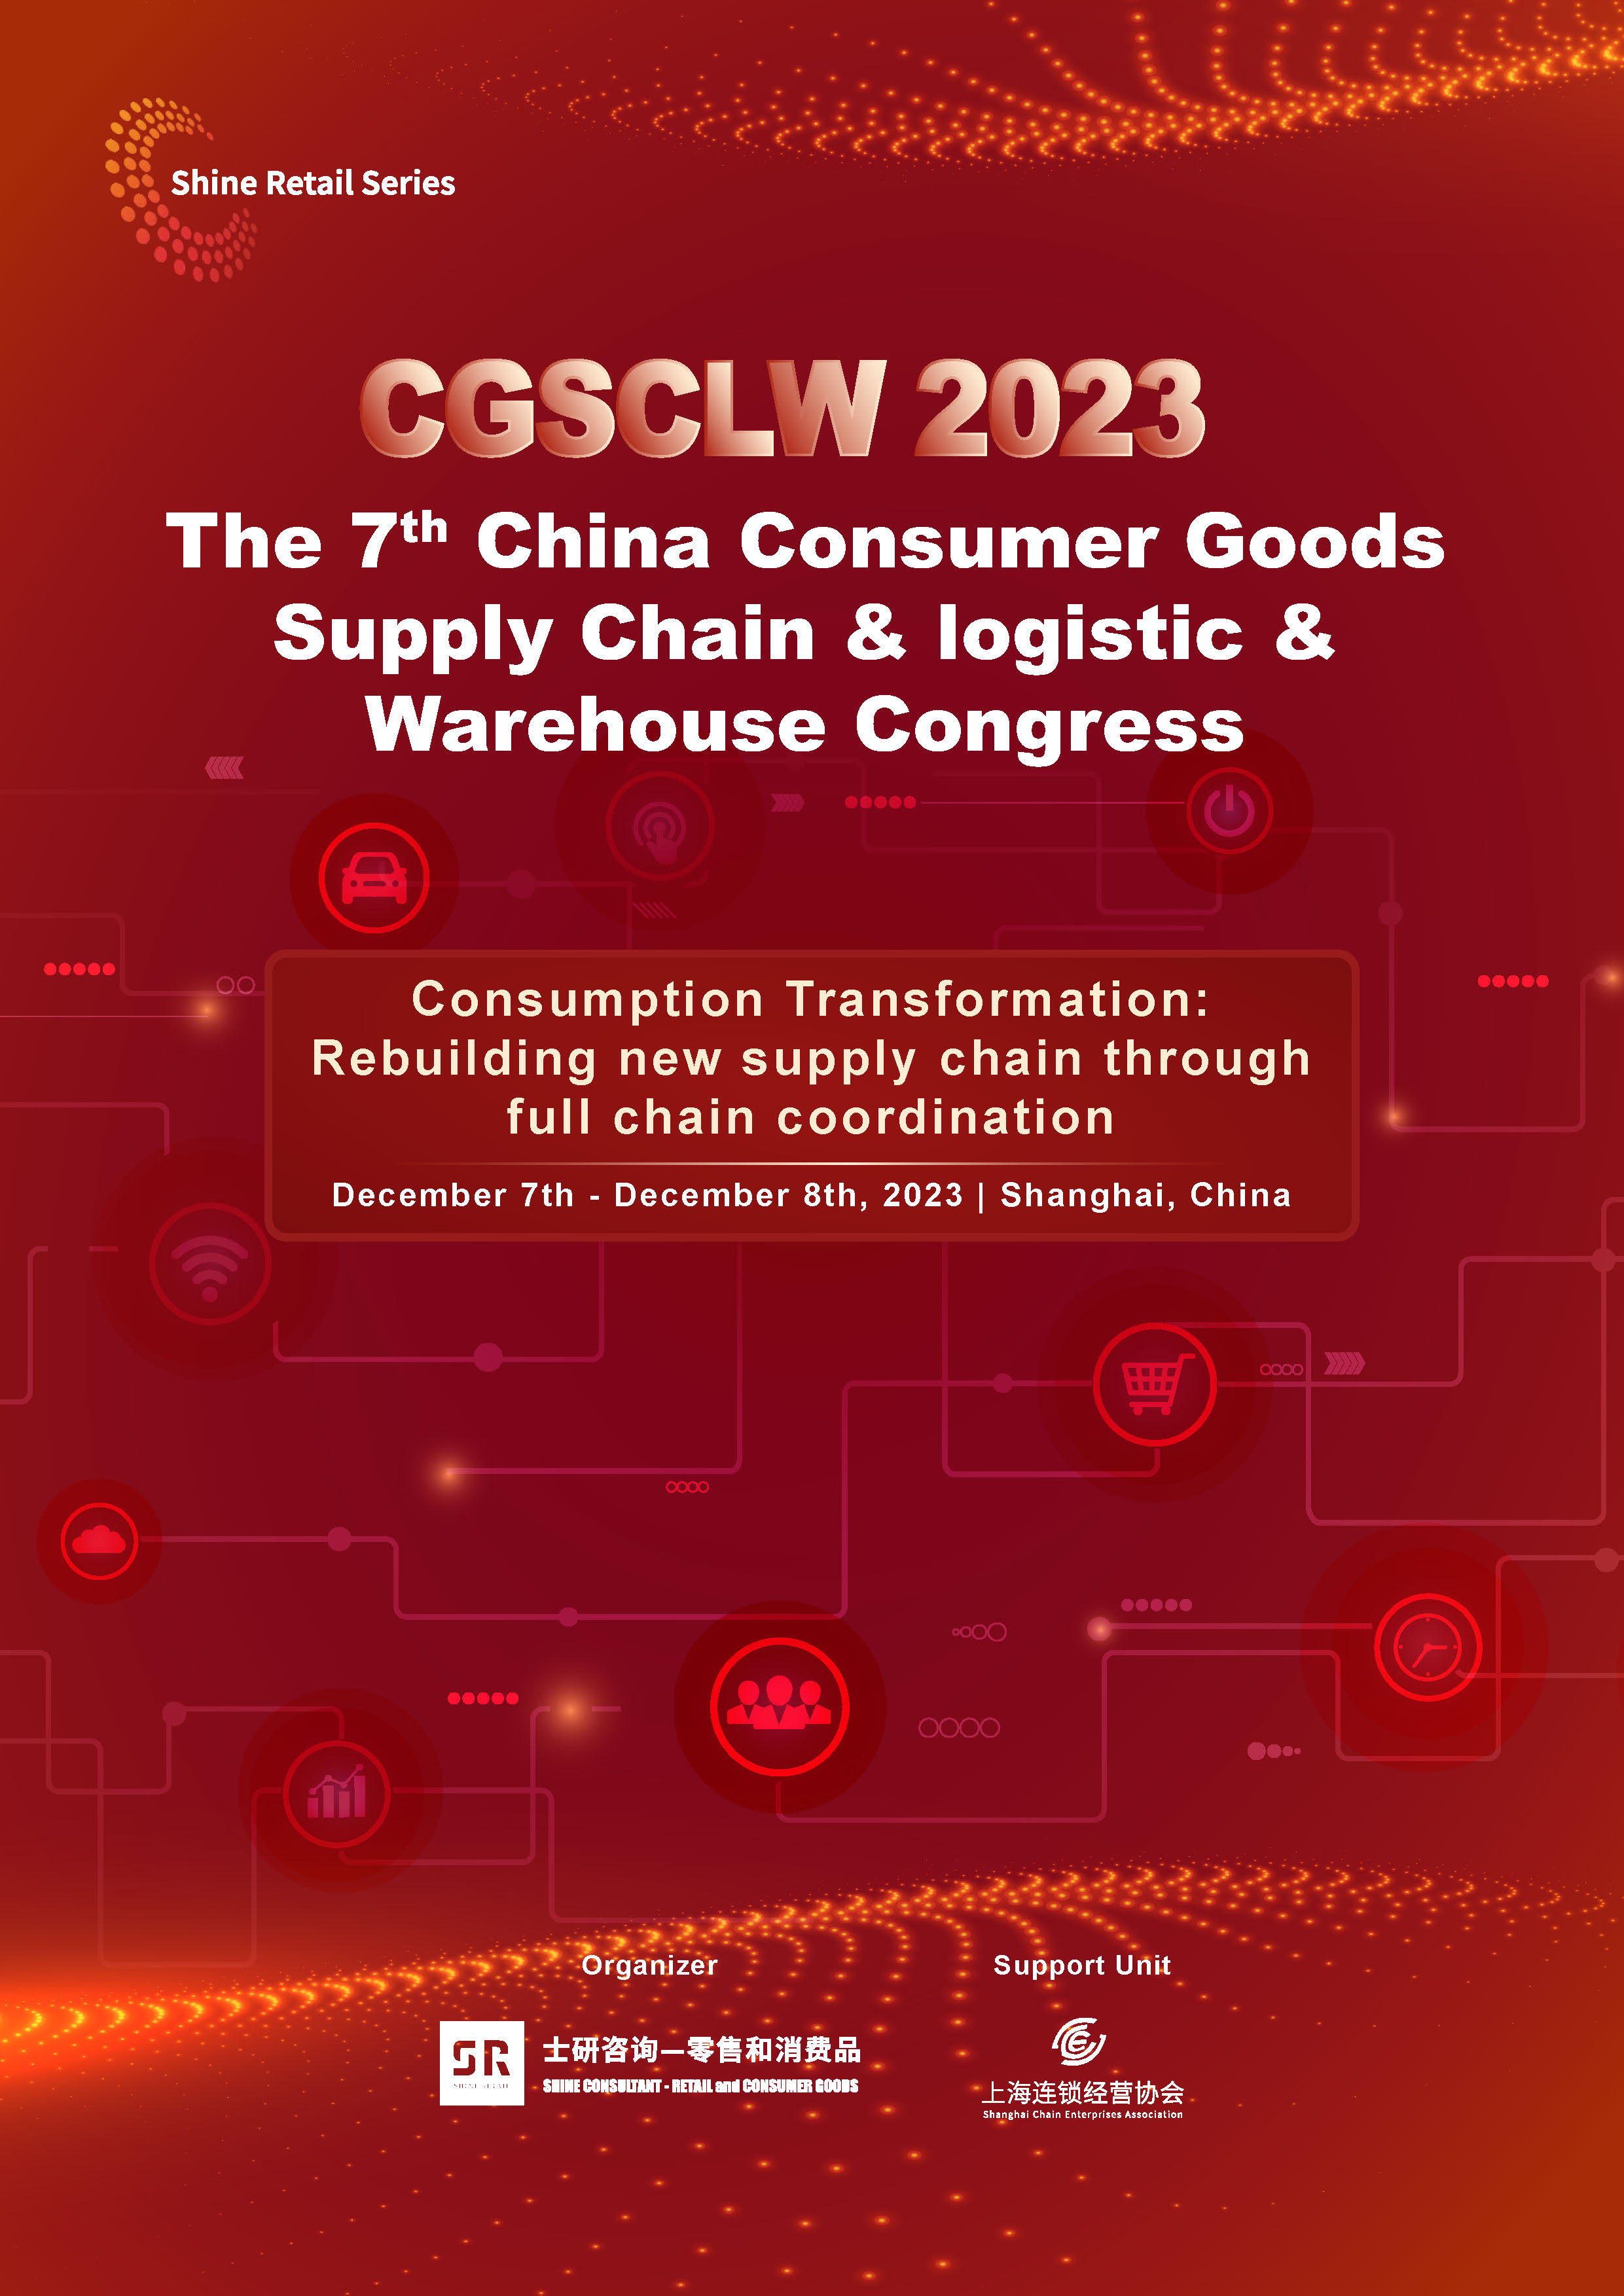 The 7th China Consumer Goods Supply Chain & logistic & Warehouse Congress